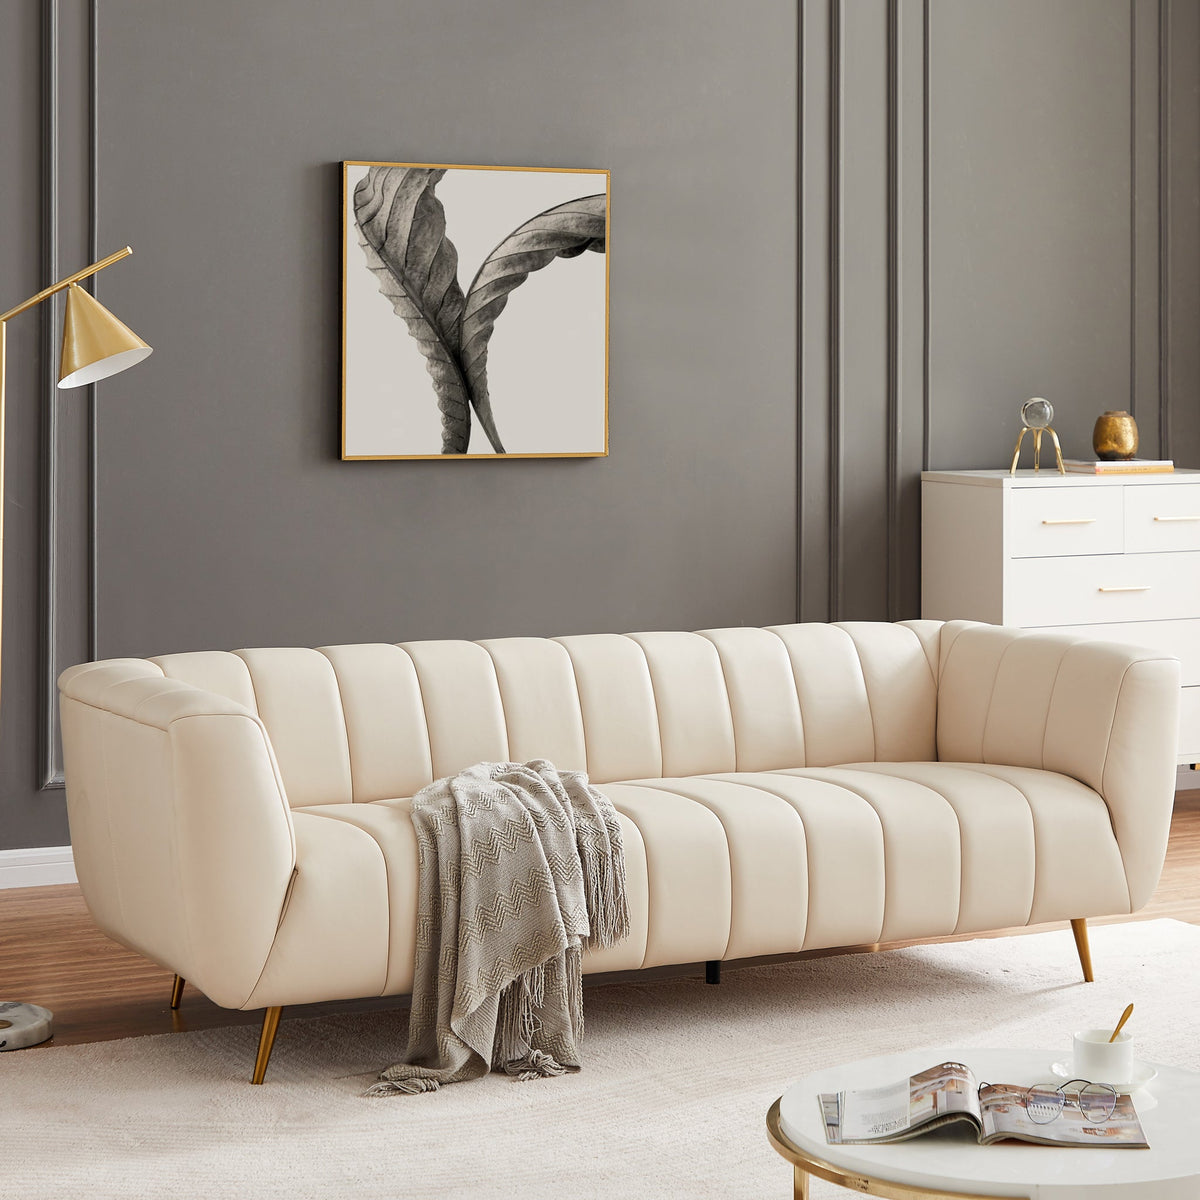 Clodine Sofa - Beige Leather | Mid in Mod | Houston TX | Best Furniture stores in Houston